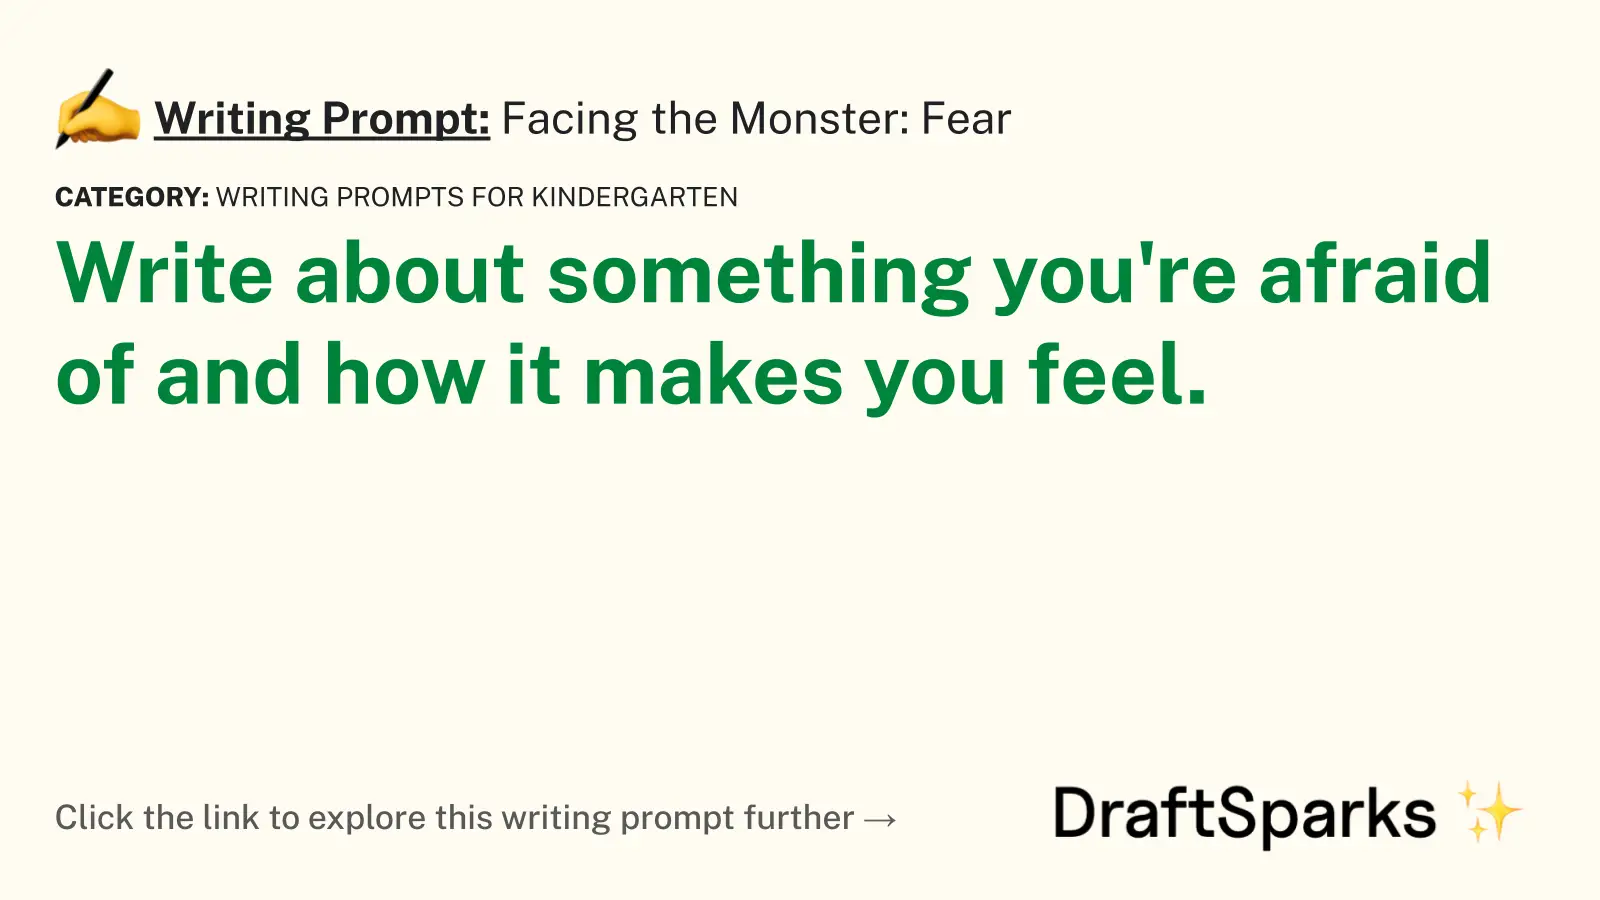 Facing the Monster: Fear